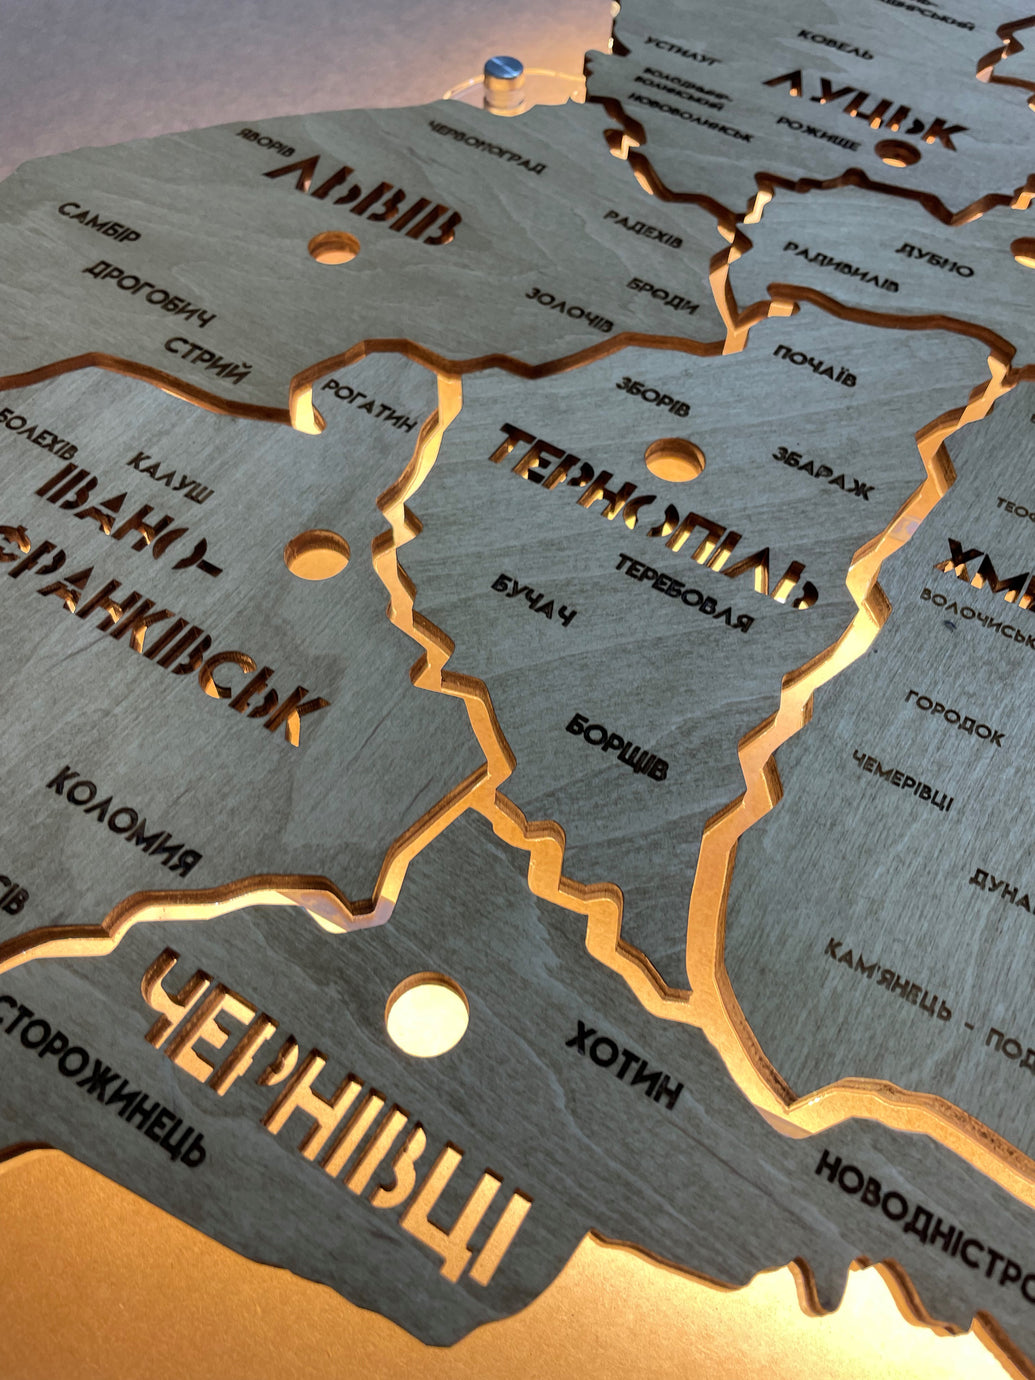 Detailed Ukraine LED map on acrylic glass with backlighting  between regions color Oak